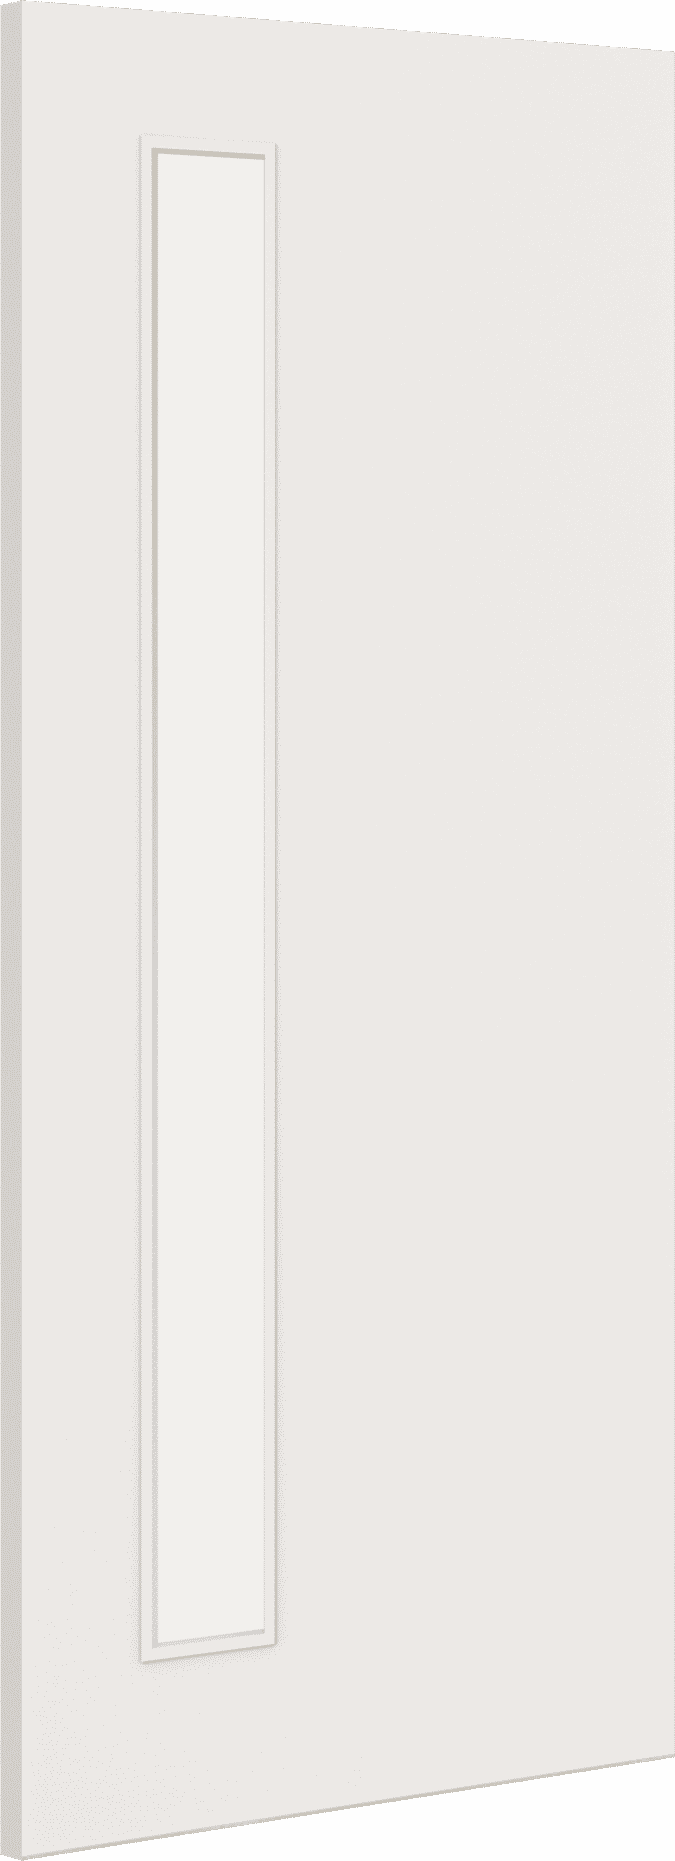 2040mm x 826mm x 44mm Architectural Paint Grade White 06 Clear Glazed Fire Door Blank